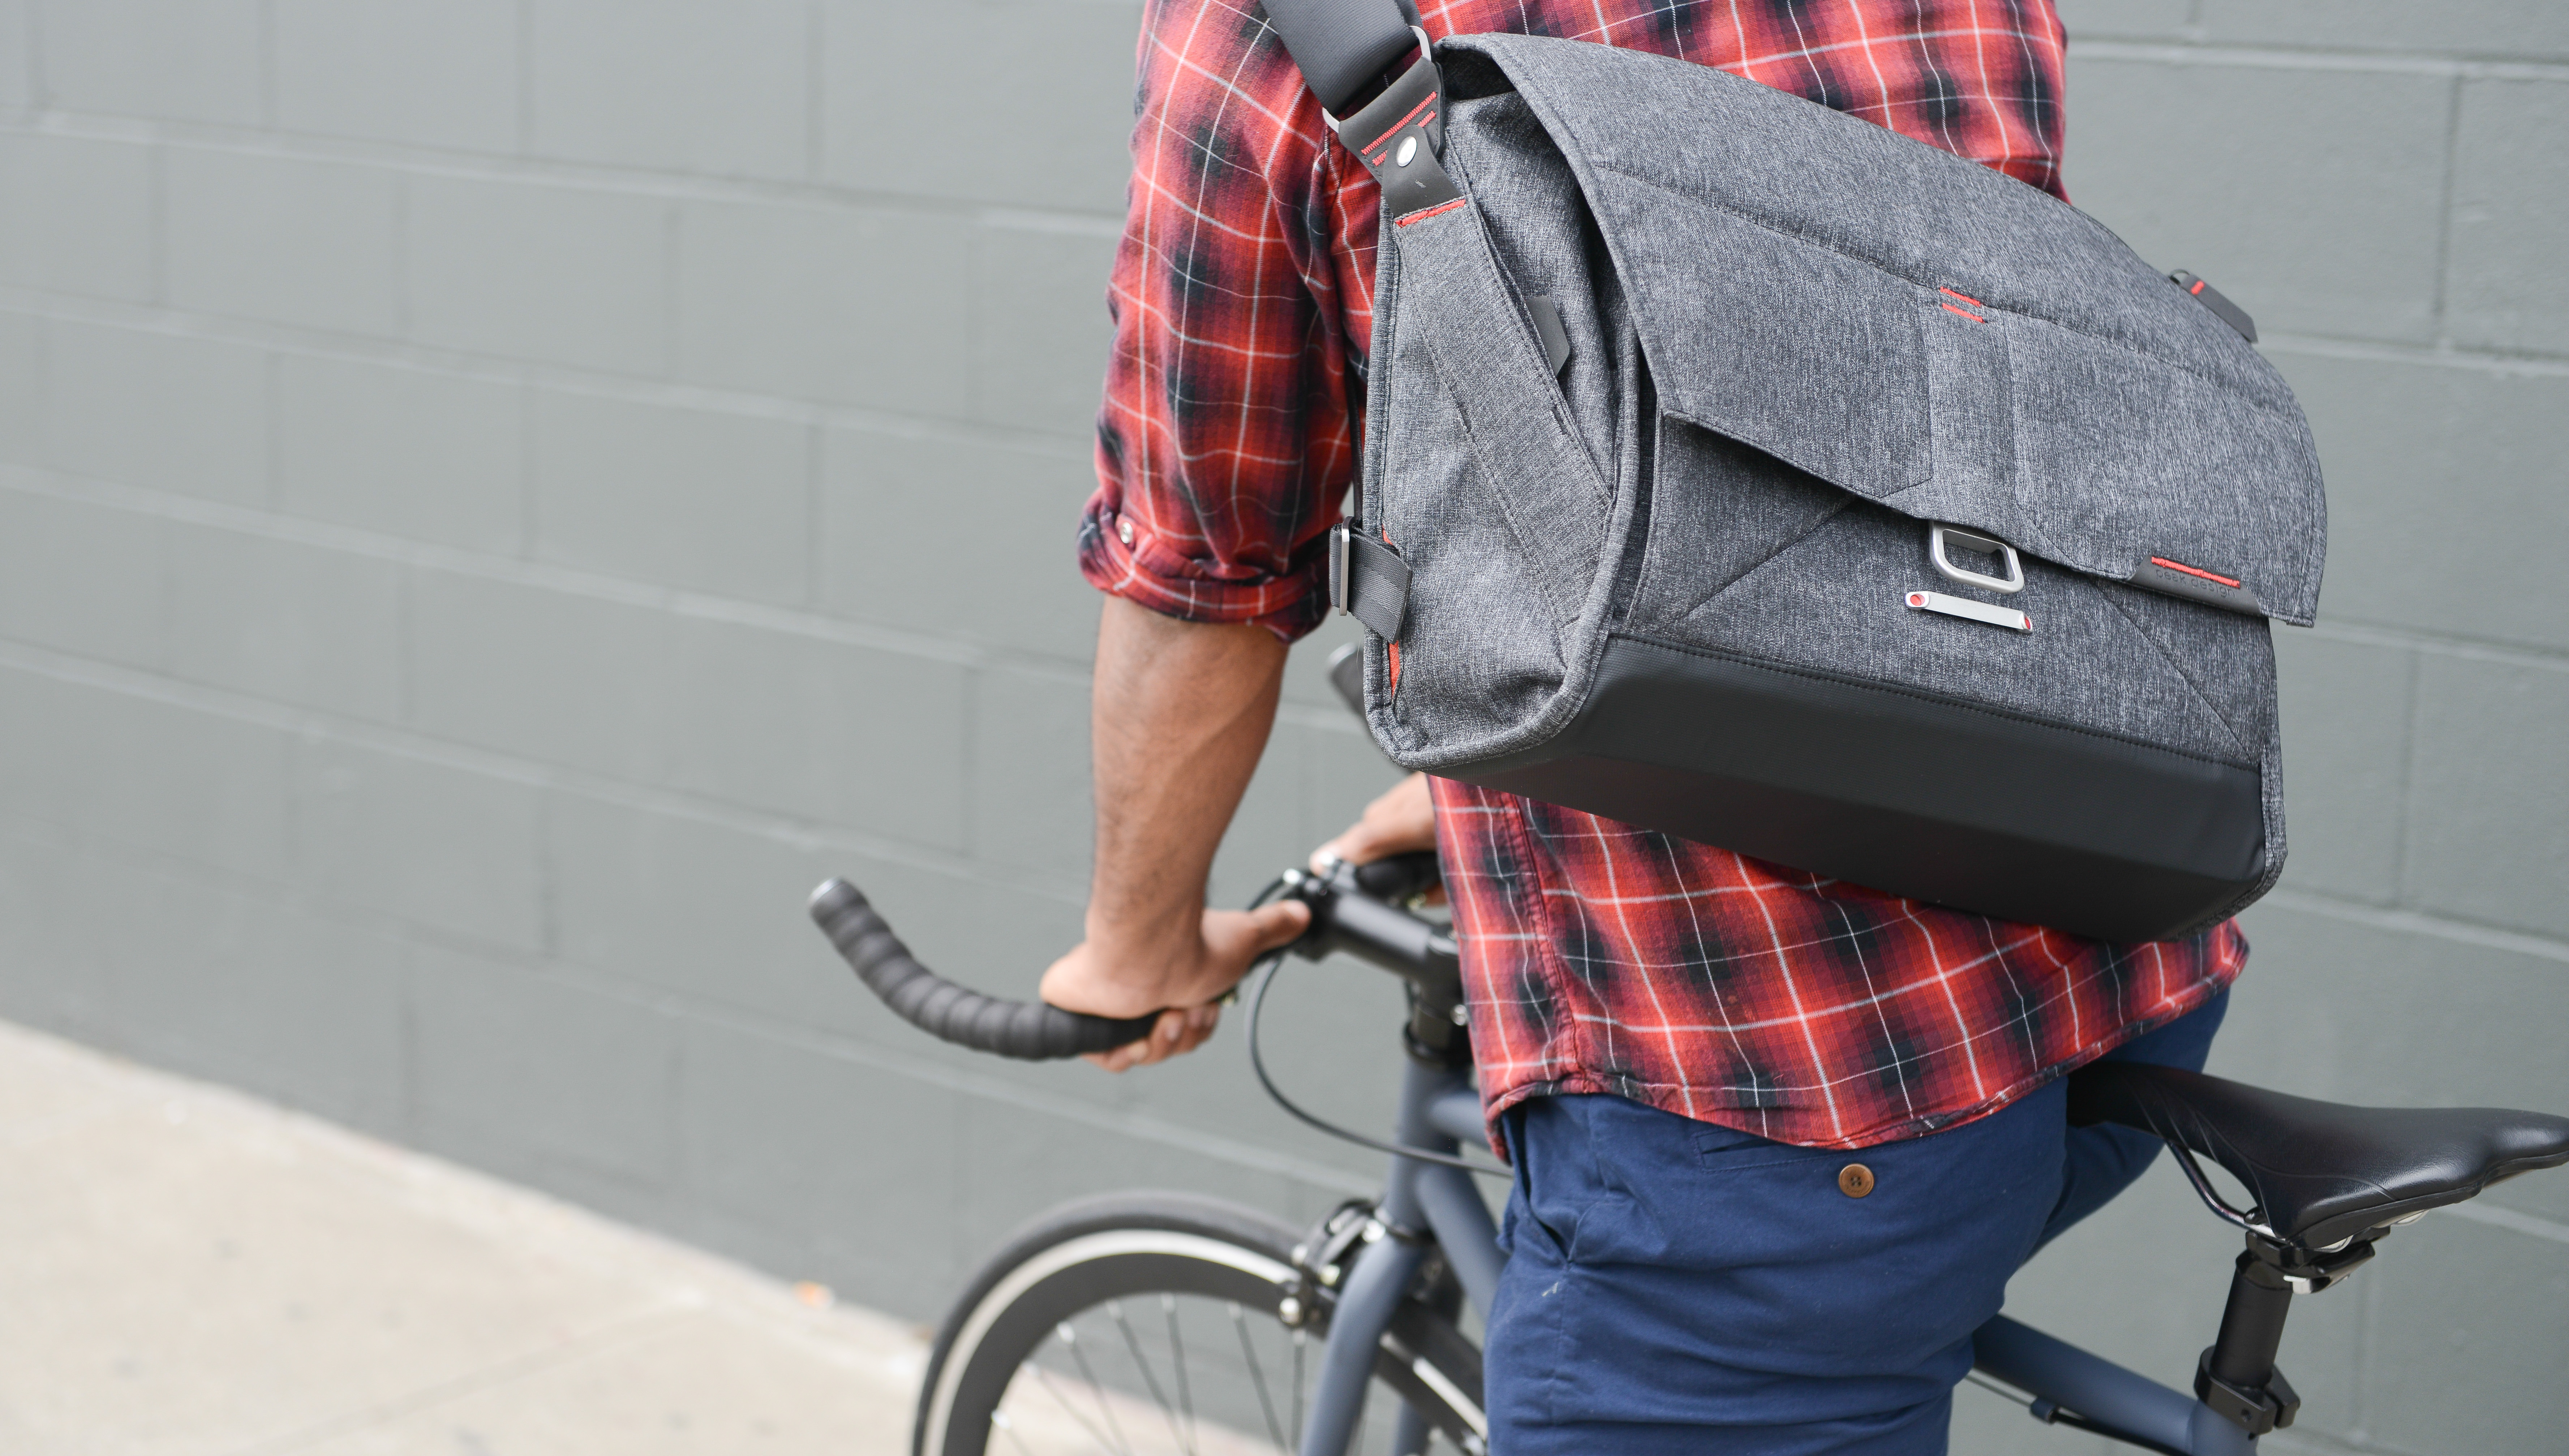 Ugh, hipsters. I mean, cool bag, bro. I mean, this was the Kickstarter campaign that smashed all of Peak Design's previous records, collecting nearly $5m from more than 17,000 backers.